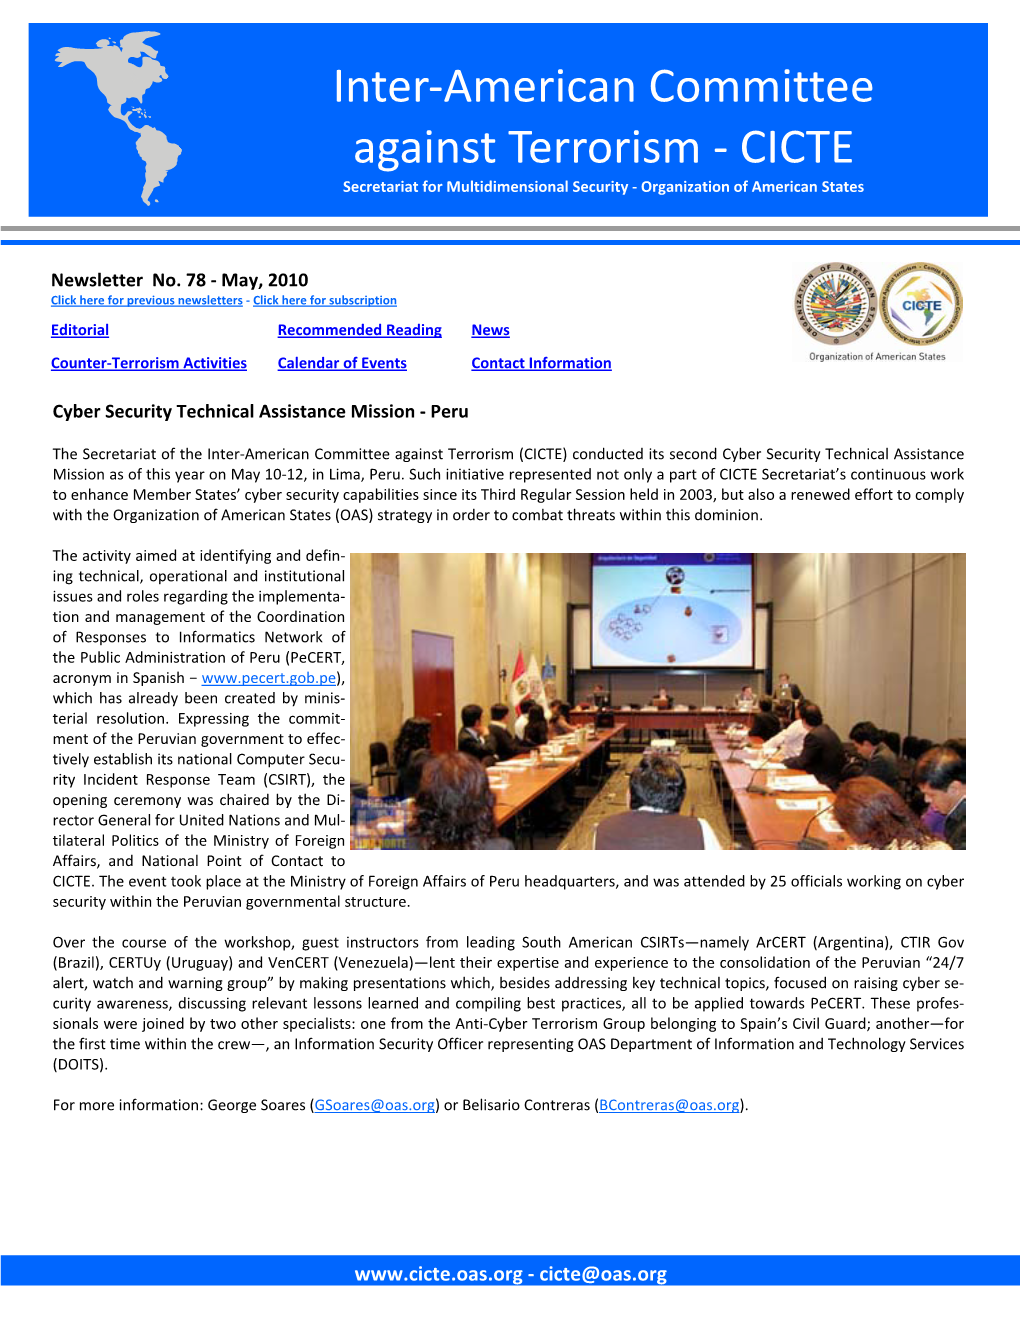 Cyber Security Technical Assistance Mission ‐ Peru